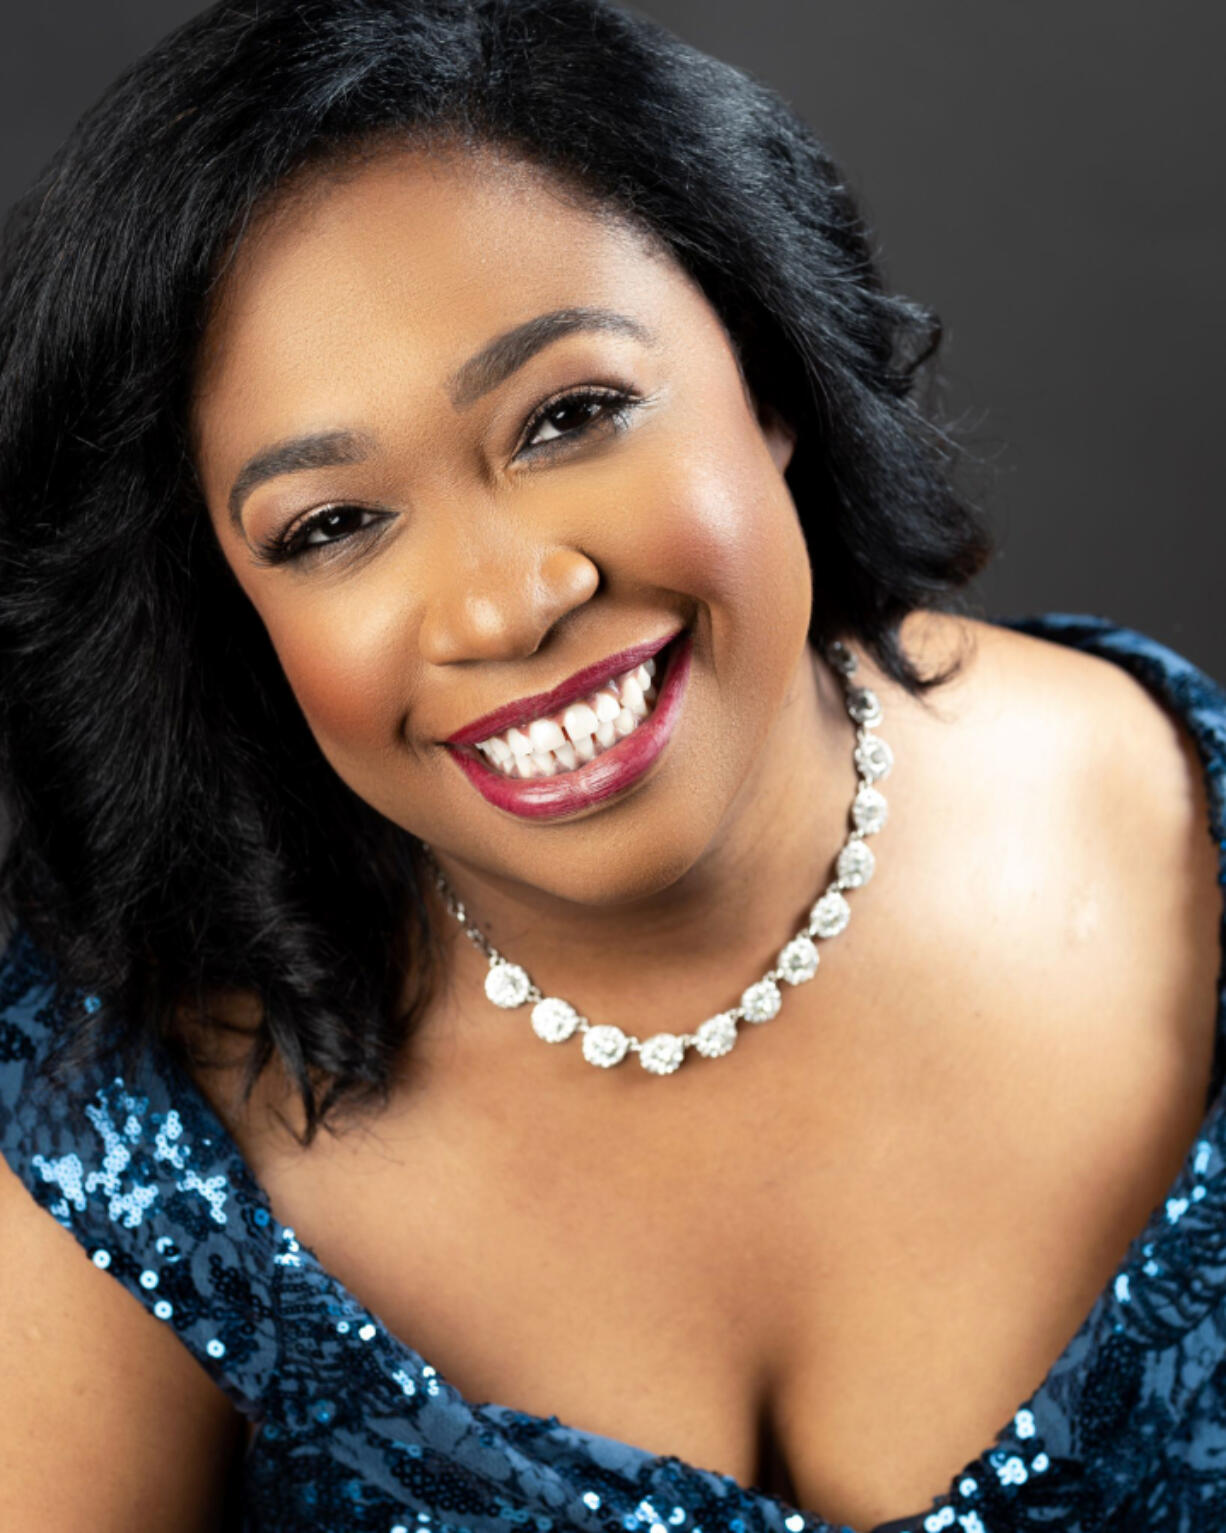 Pianist Michelle Cann kicks off the Vancouver Symphony Orchestra's 44th season this weekend.